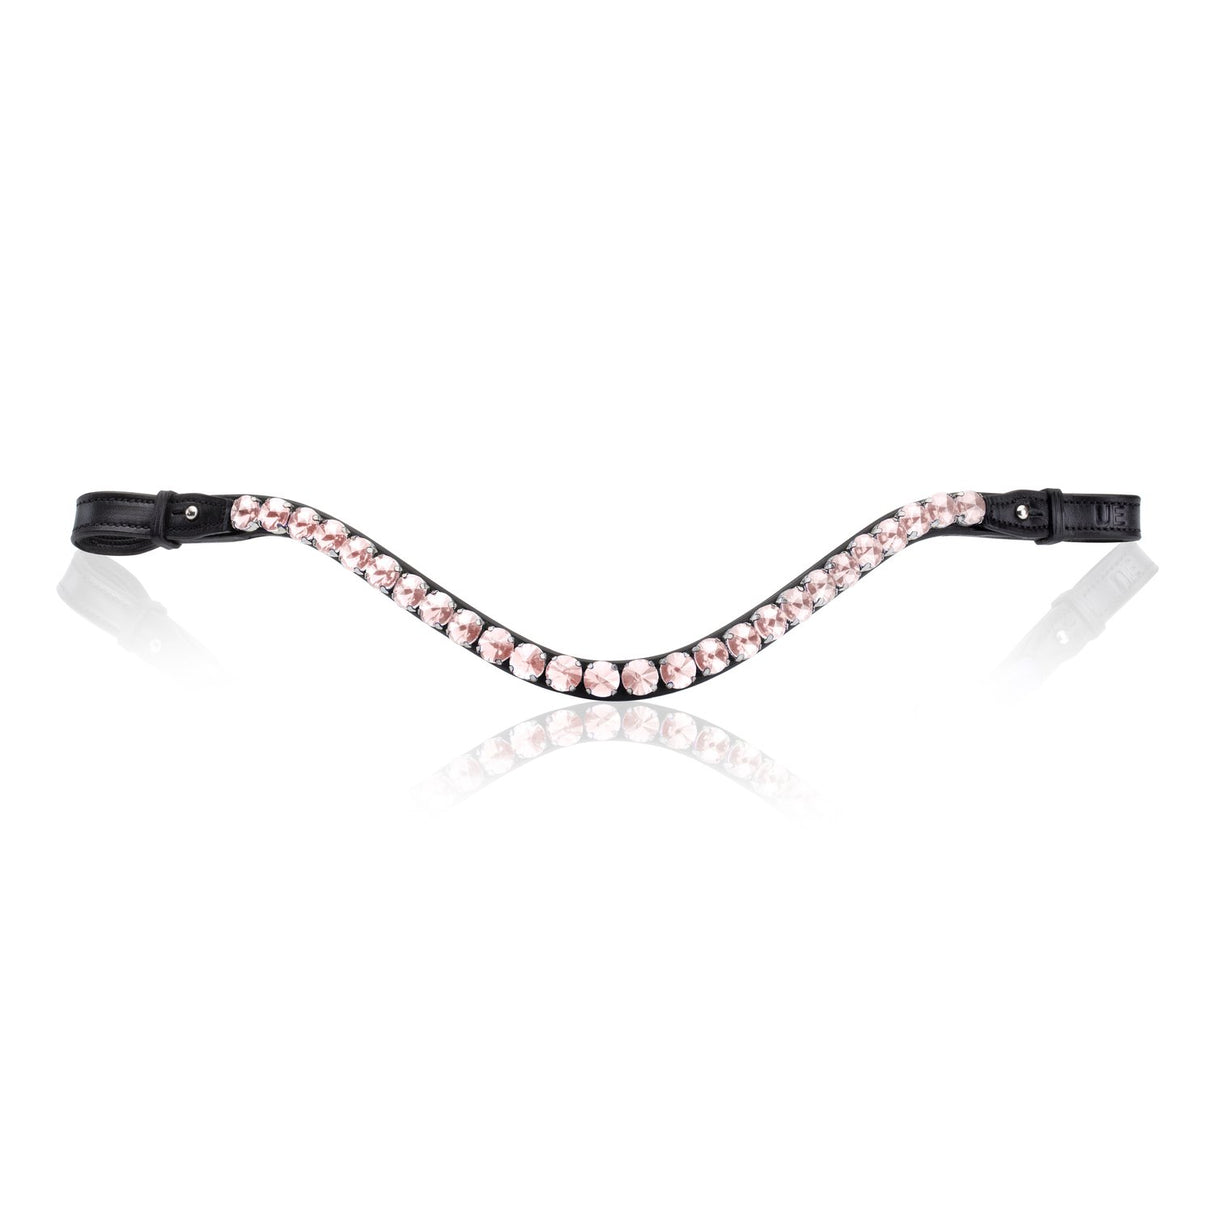 Utzon Equestrian Empire Browband Pink